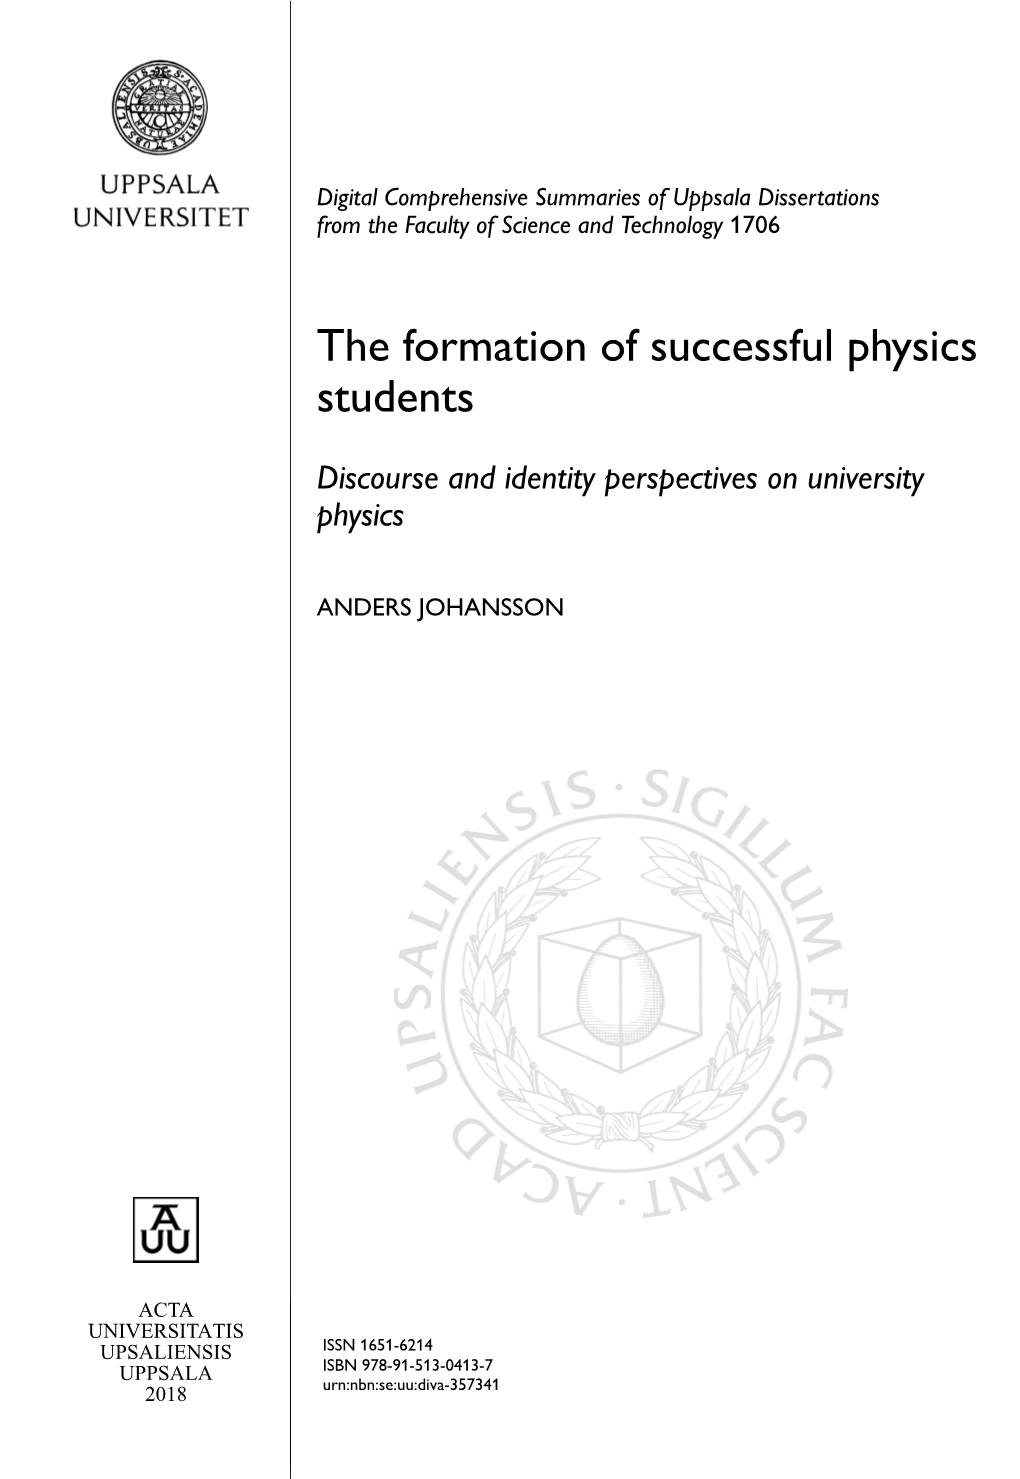 The Formation of Successful Physics Students